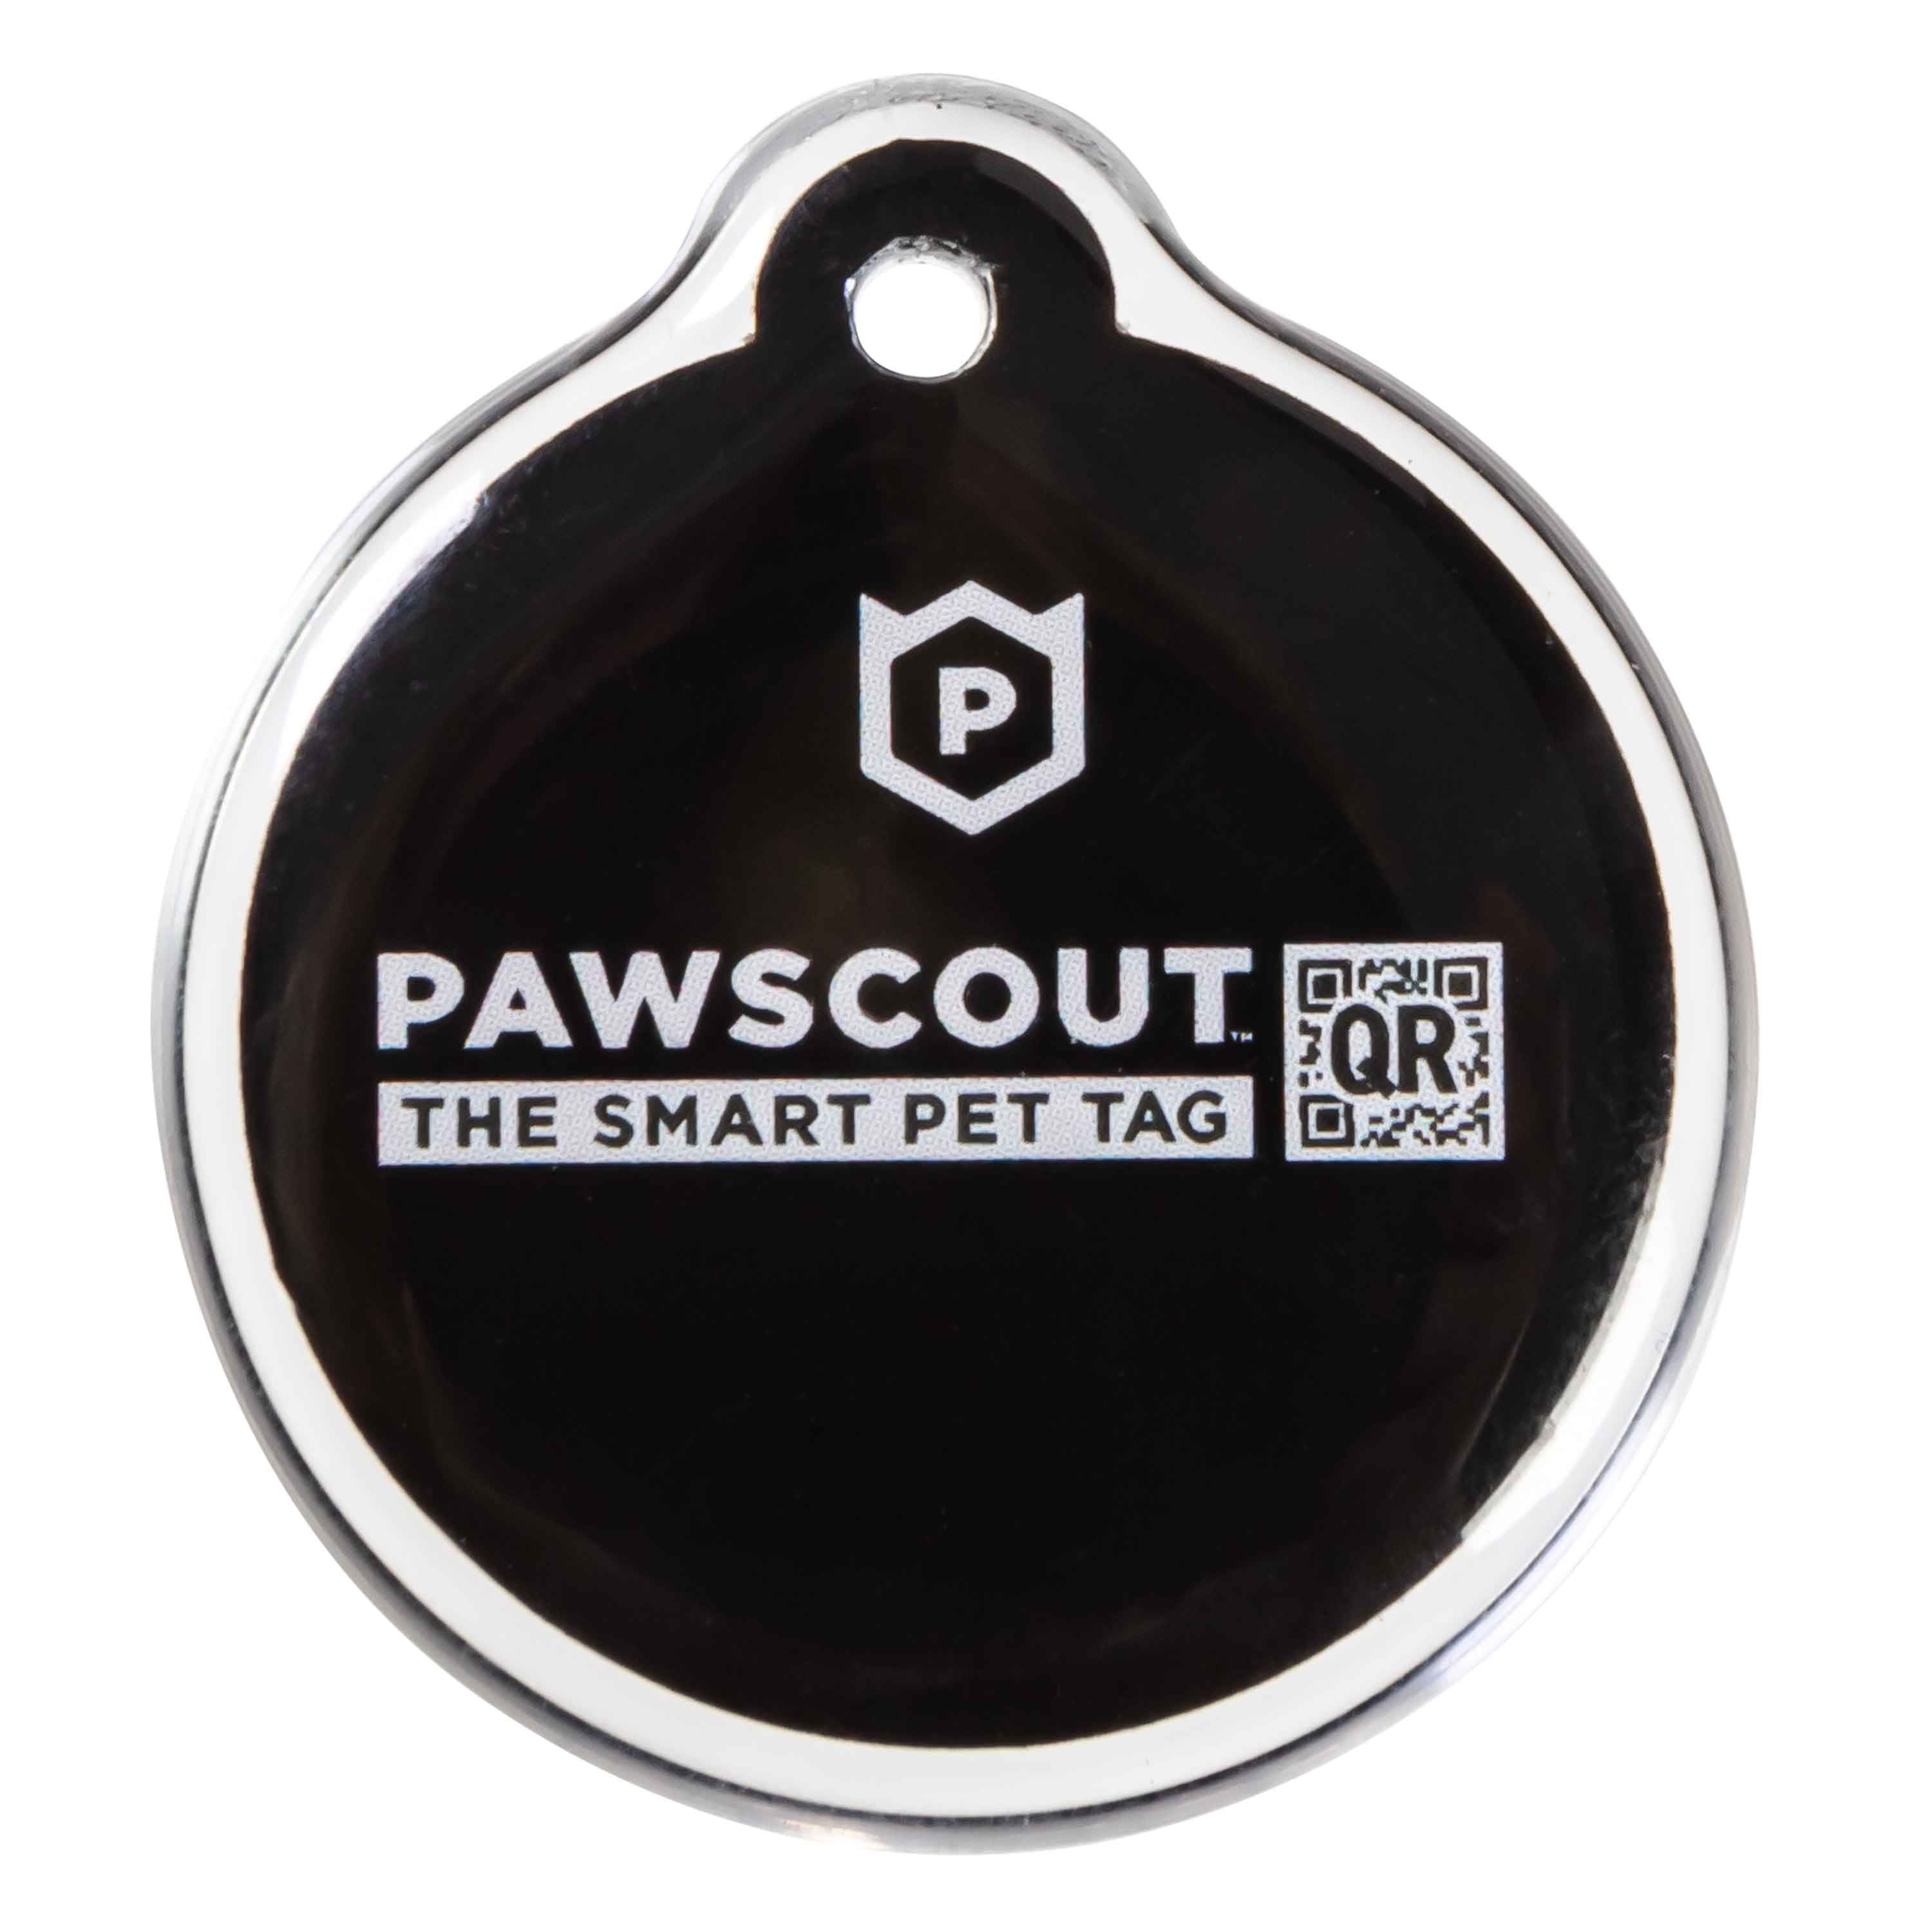 PawscoutQR Smart Pet Tag for Dogs & Cats, Pair with App to Send Lost & Found Pet Alerts